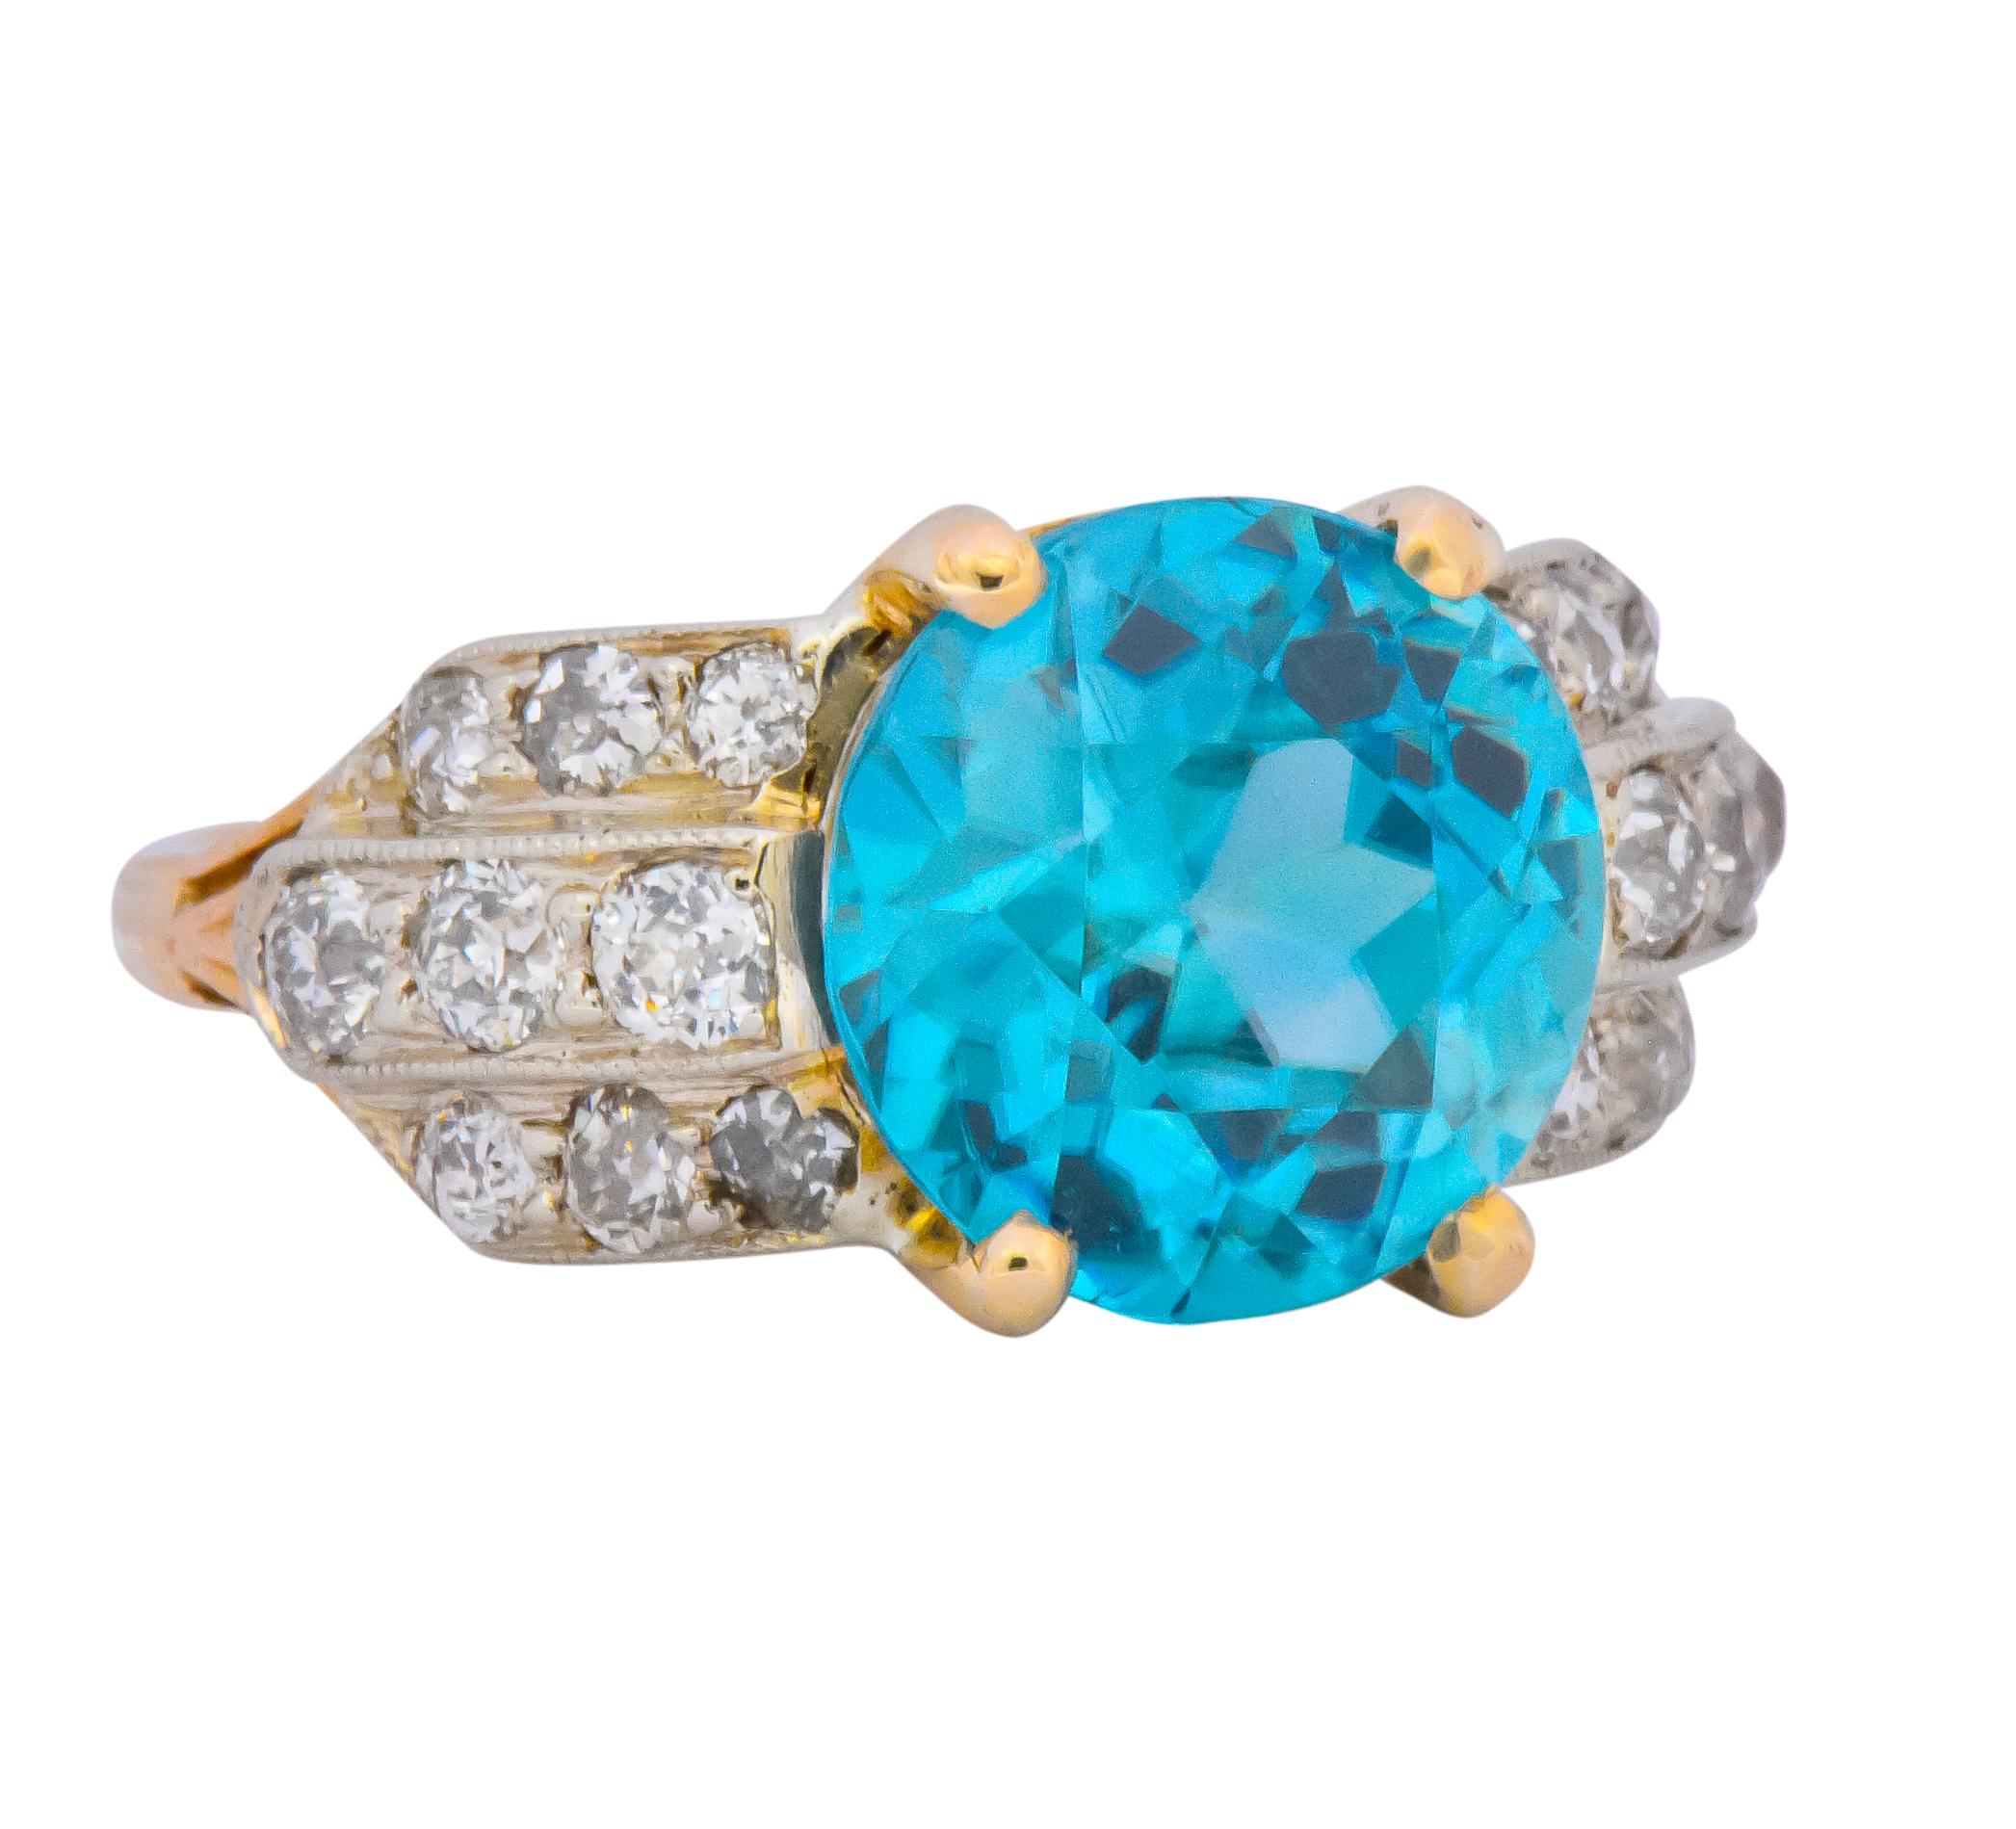 Centering a round cut zircon weighing 7.83 carats, bright vibrant blue

Flanked on both sides by old European cut diamonds, weighing approximately 0.95 carat total, G to J color and VS to SI clarity 

Zircon in a four prong yellow gold head with the